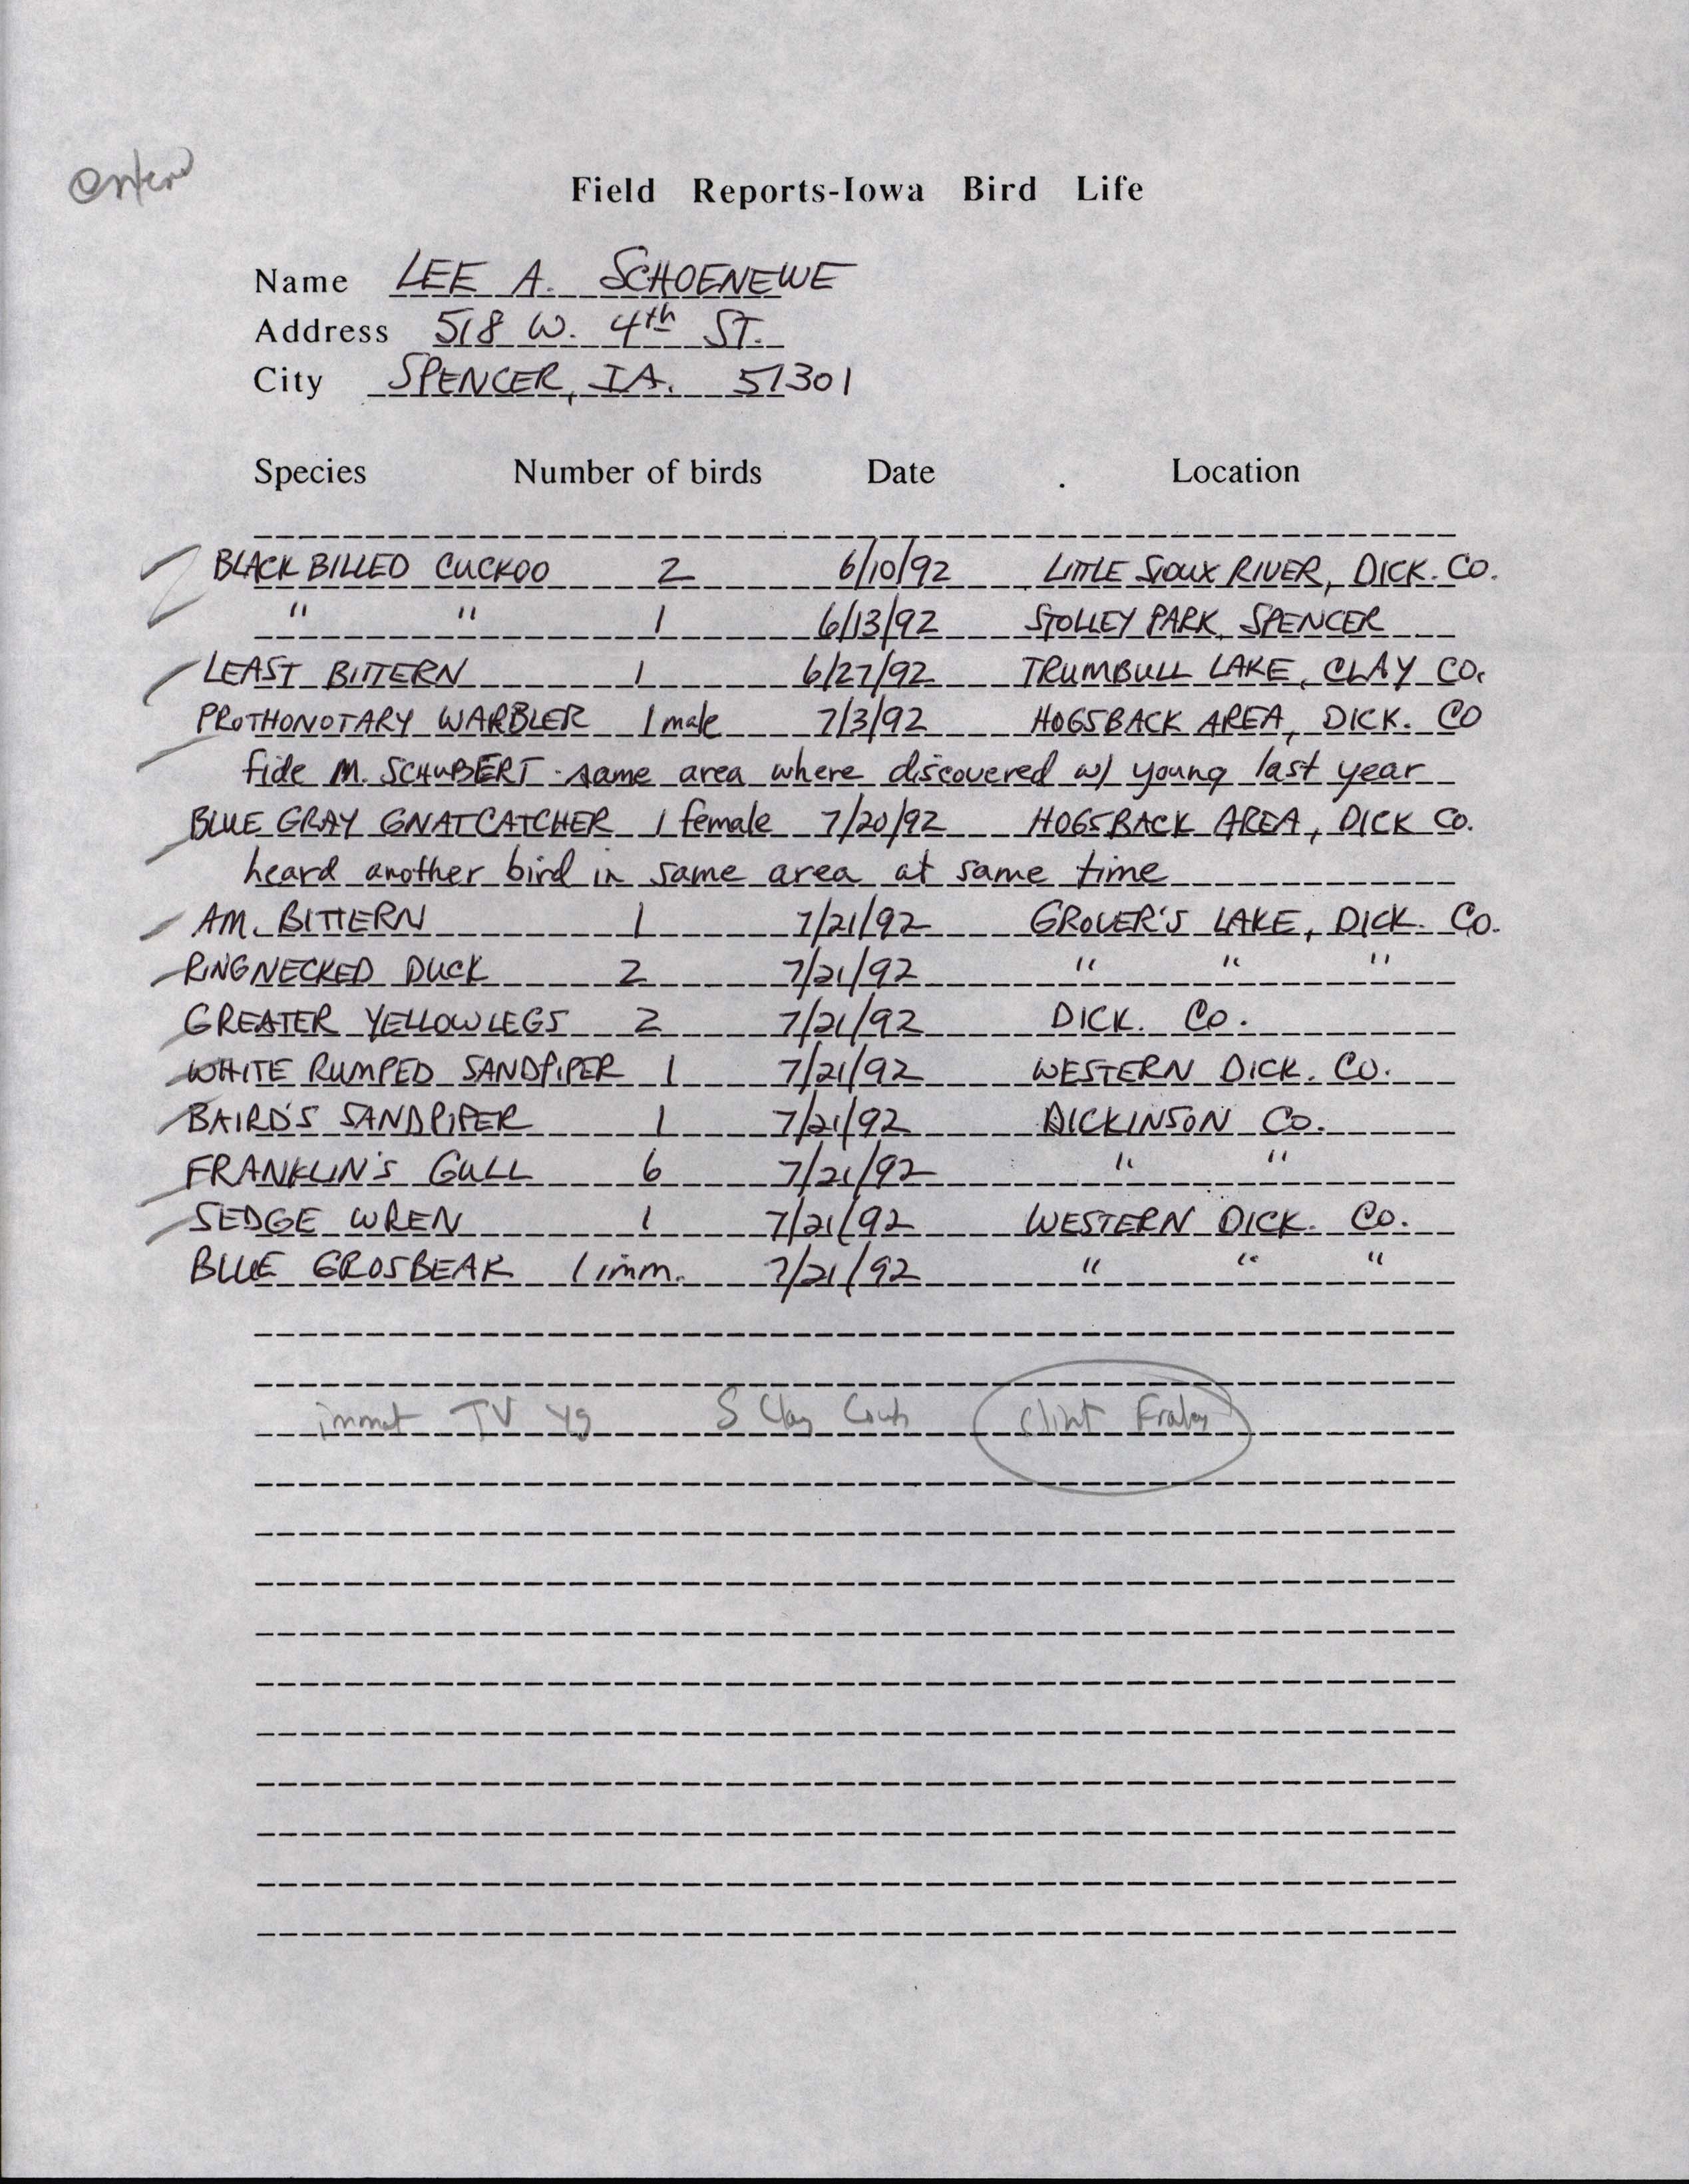 Field notes and letter to James J. Dinsmore contributed by Lee A. Schoenewe, August 2, 1992